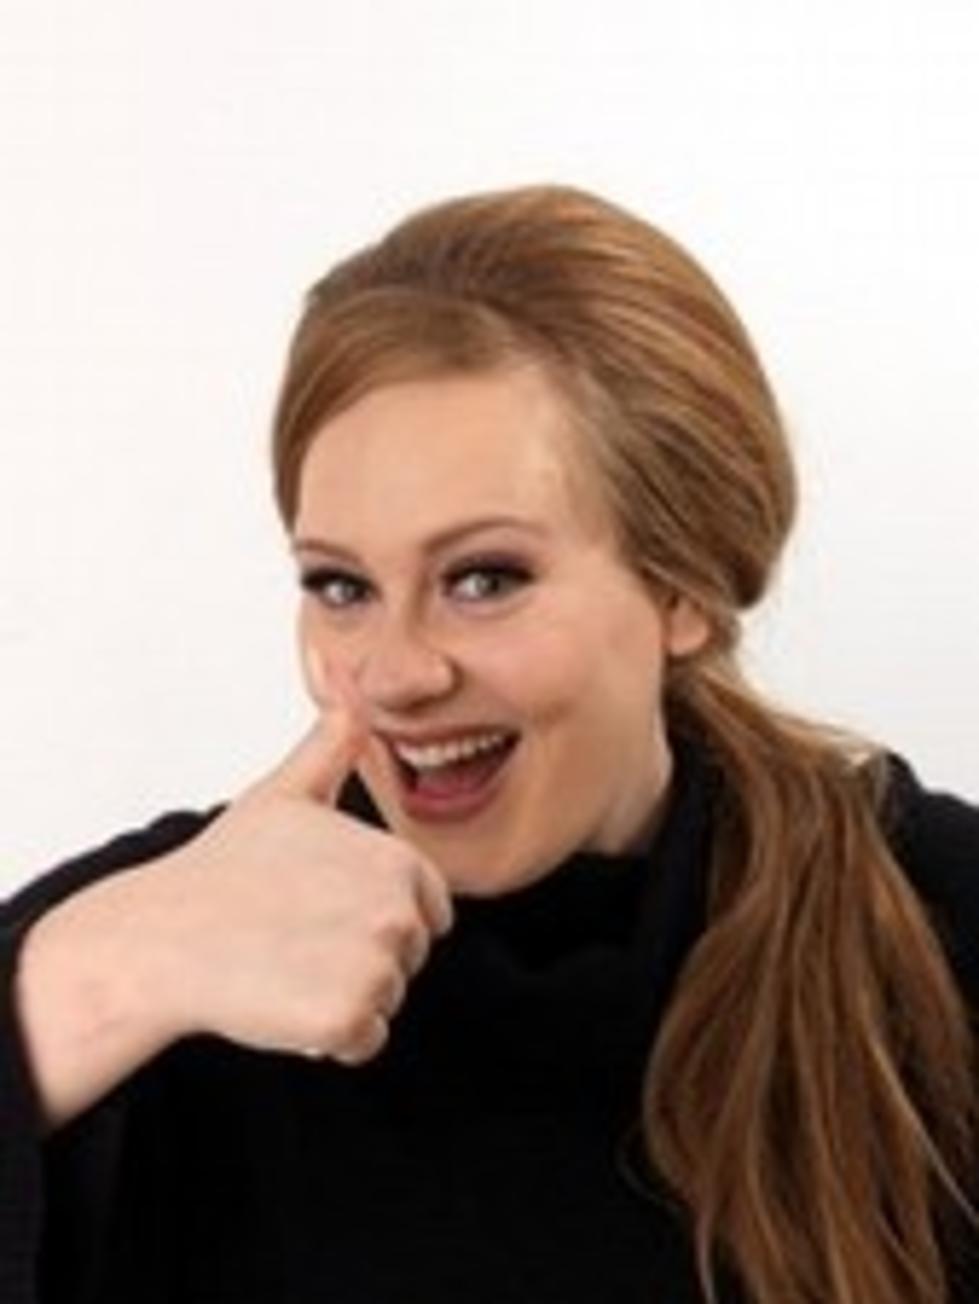 Adele Is Taking Voice Lessons To Avoid Future Laryngitis Concerns!